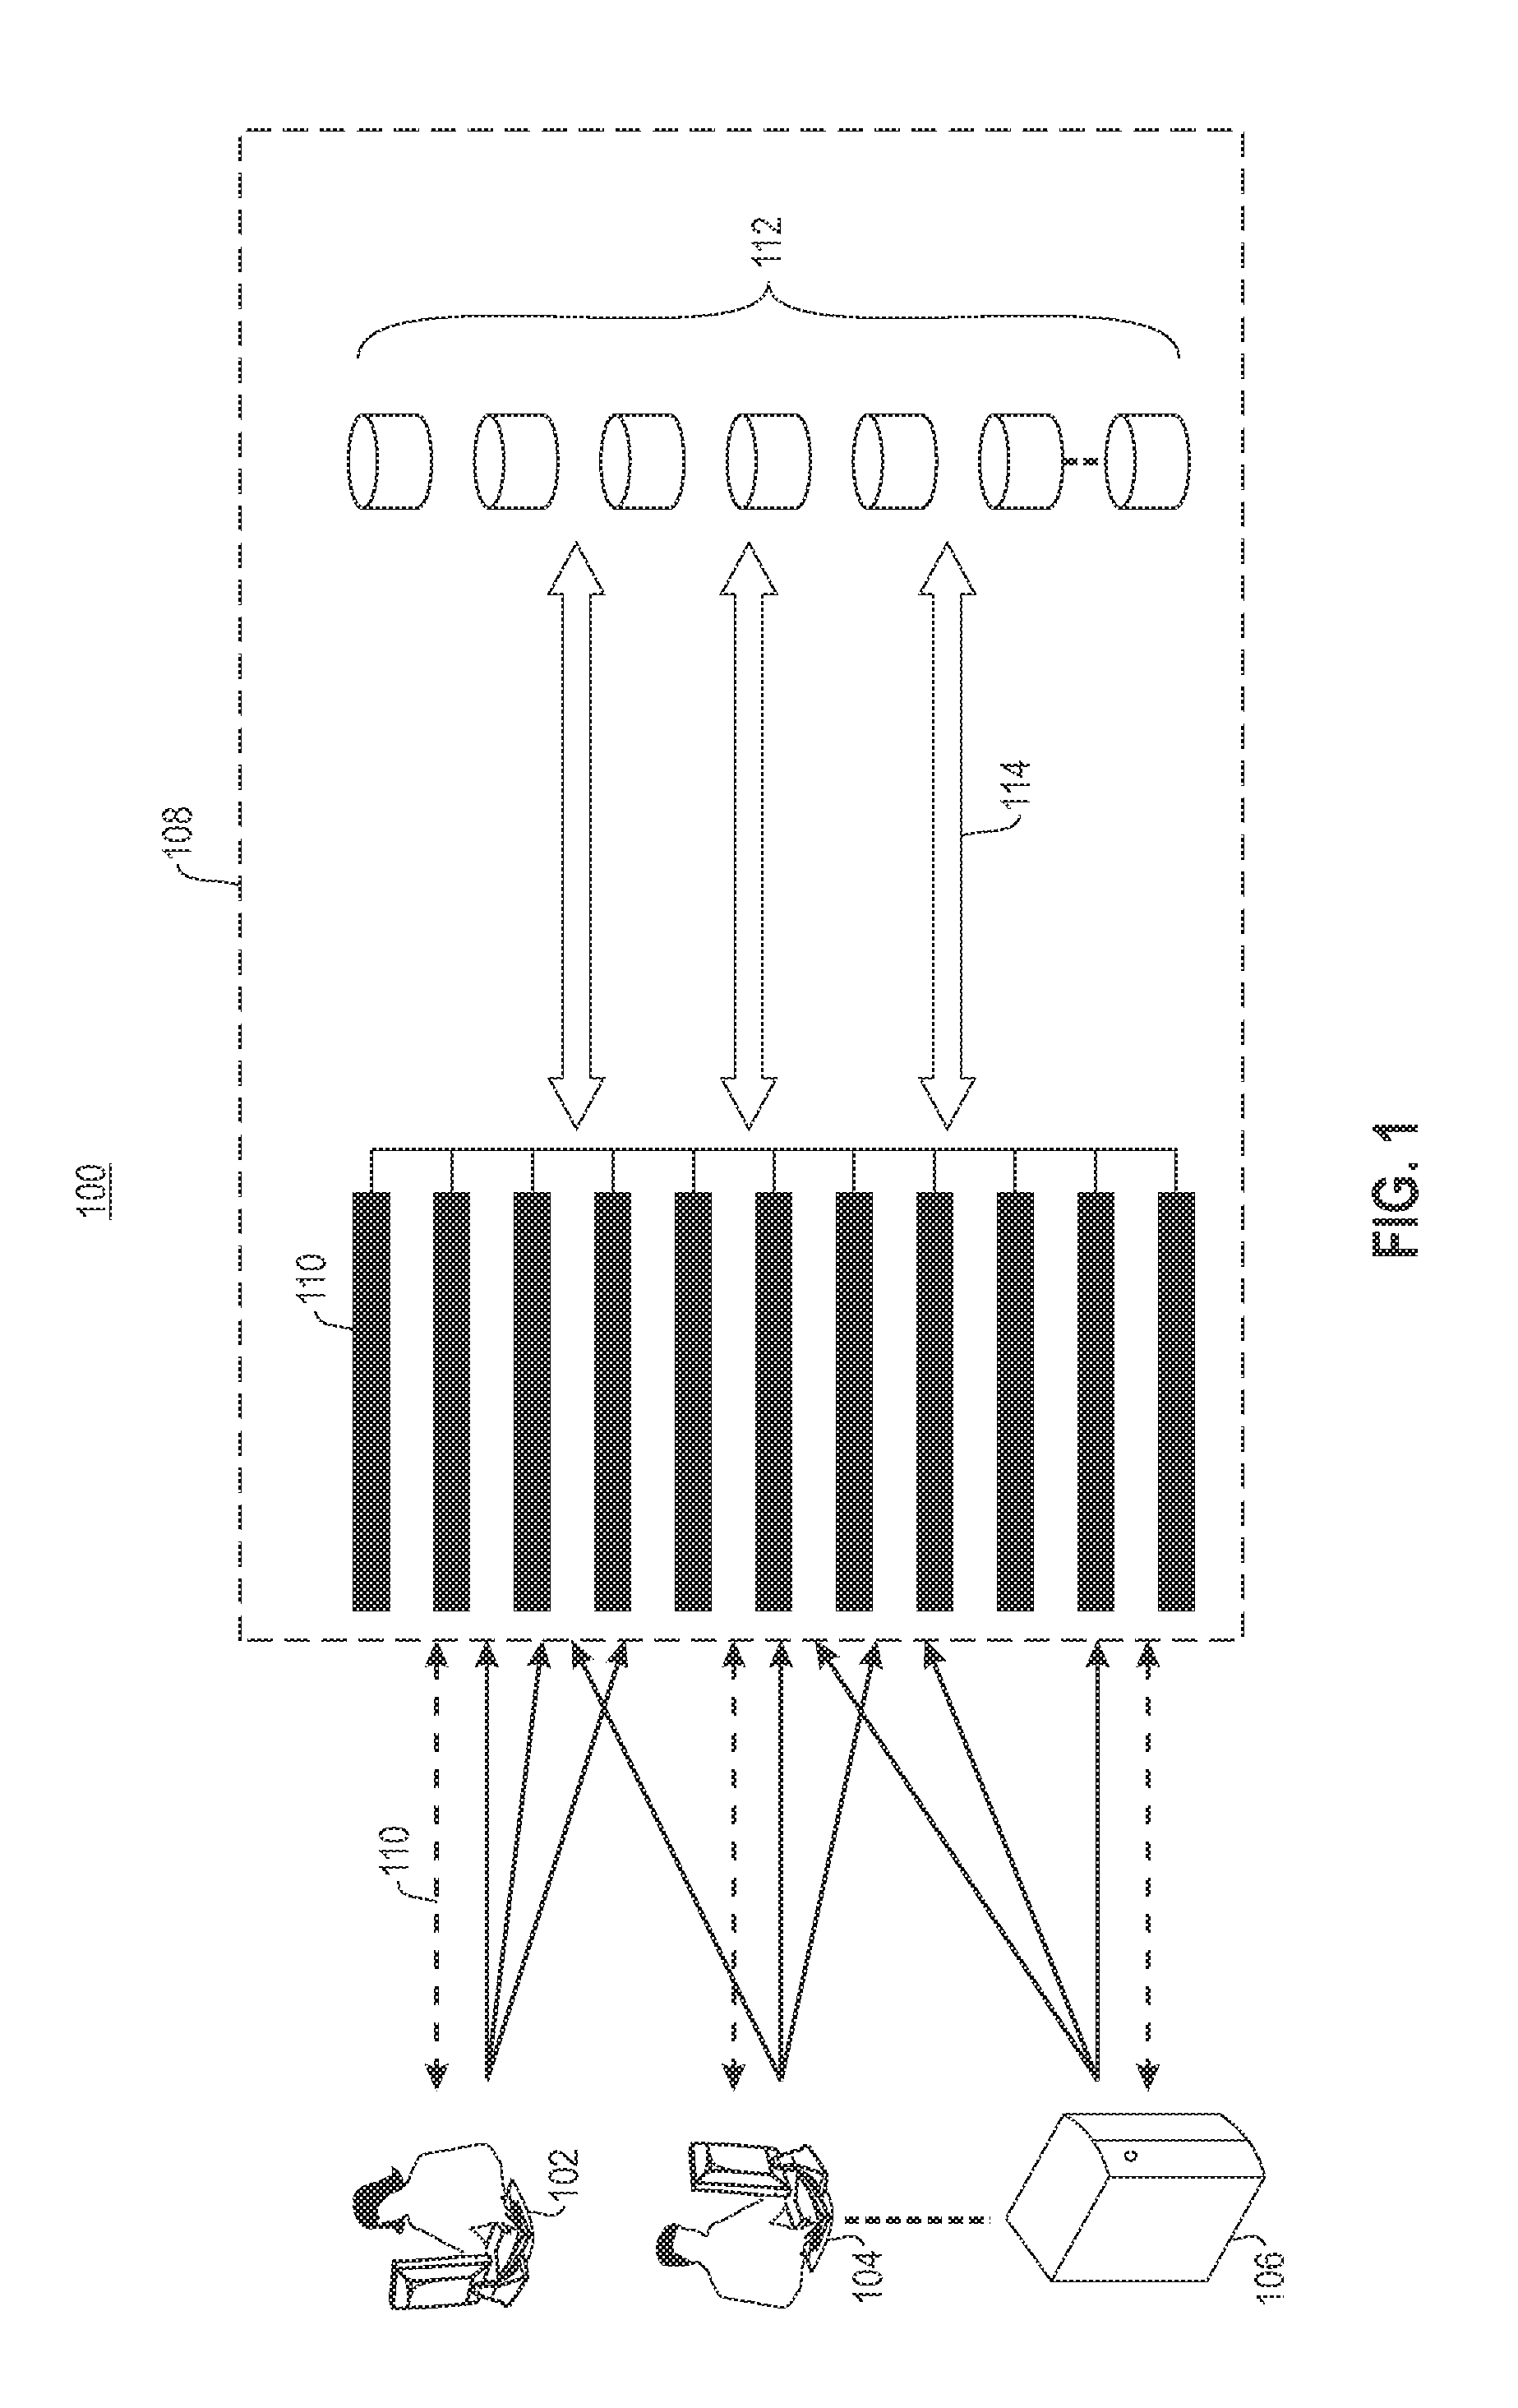 Coordinated access to a clustered file system's shared storage using shared-lock architecture